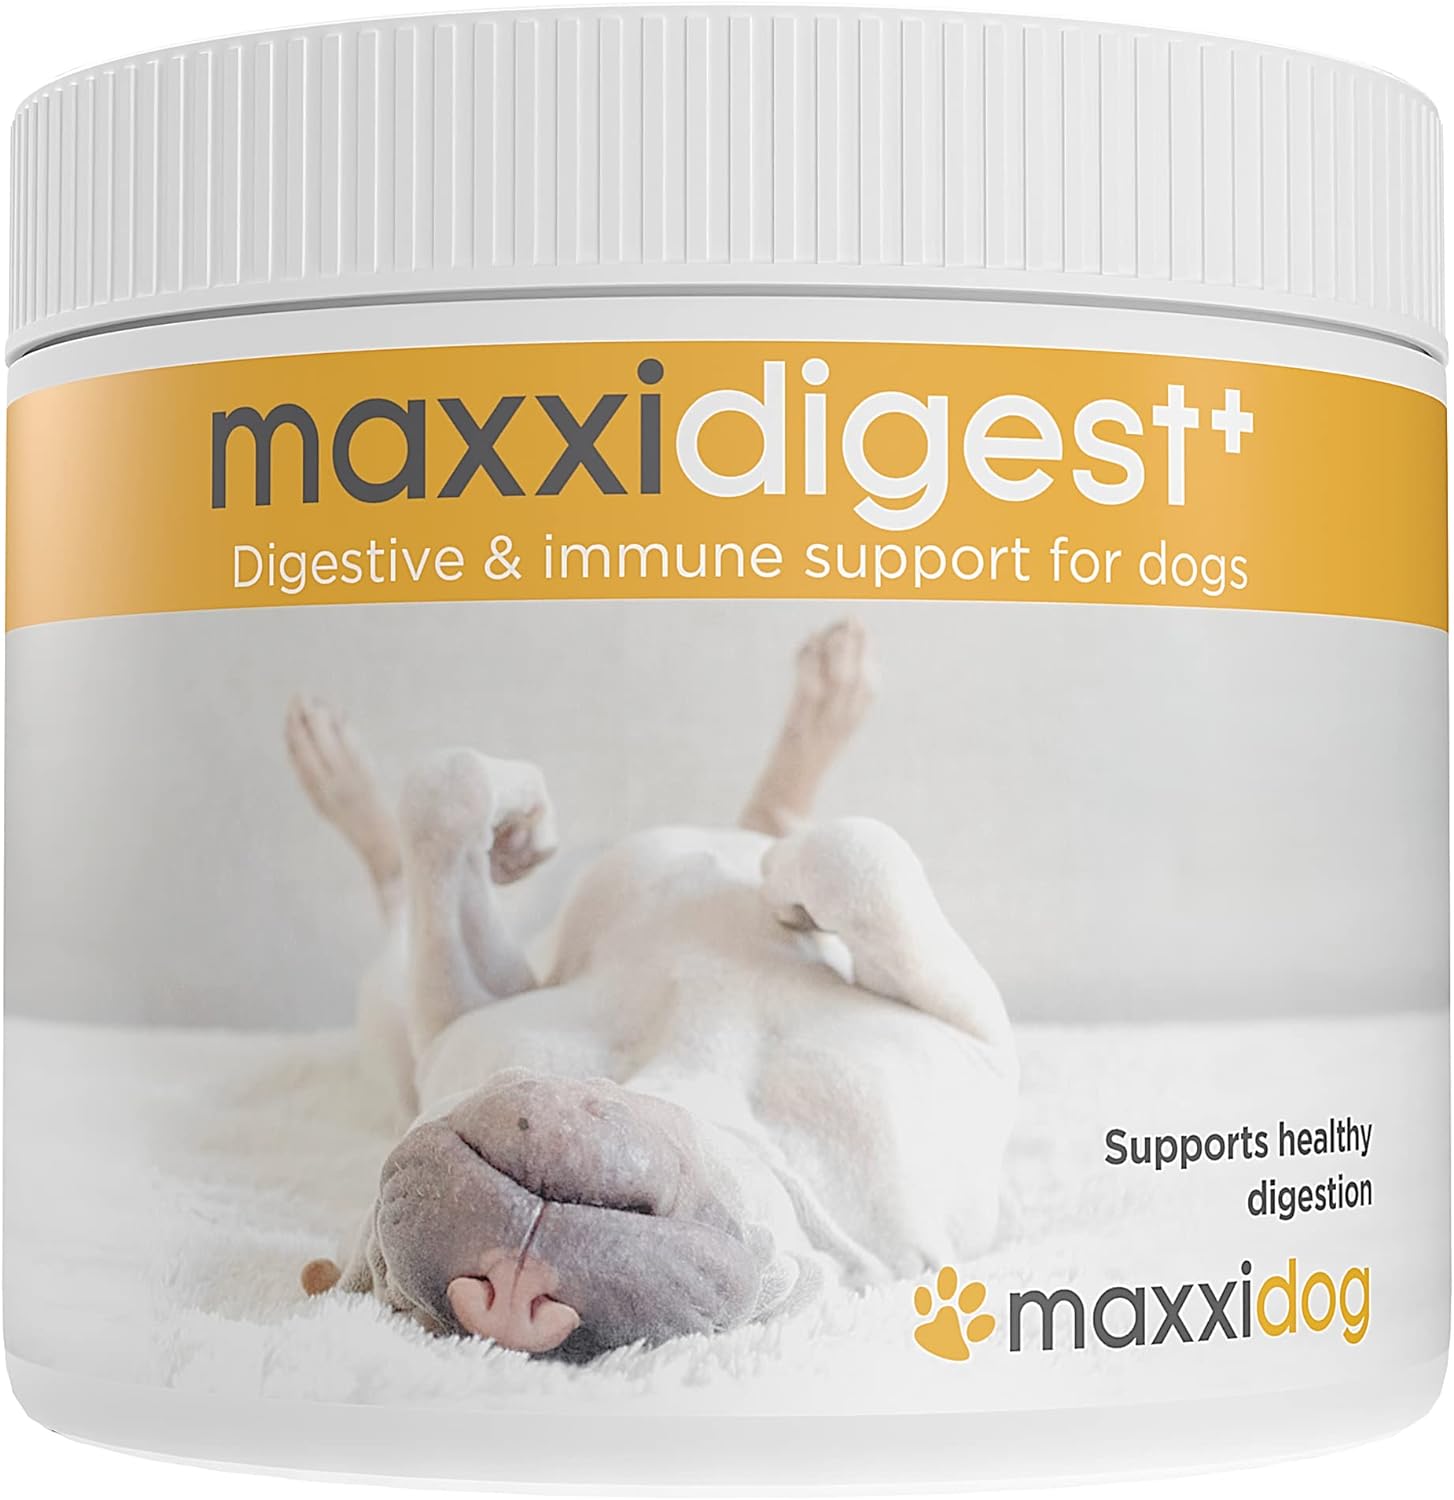 maxxidigest+ Probiotics, Prebiotics and Digestive Enzymes - Digestive and Immune Support Supplement for Dogs – 7 oz